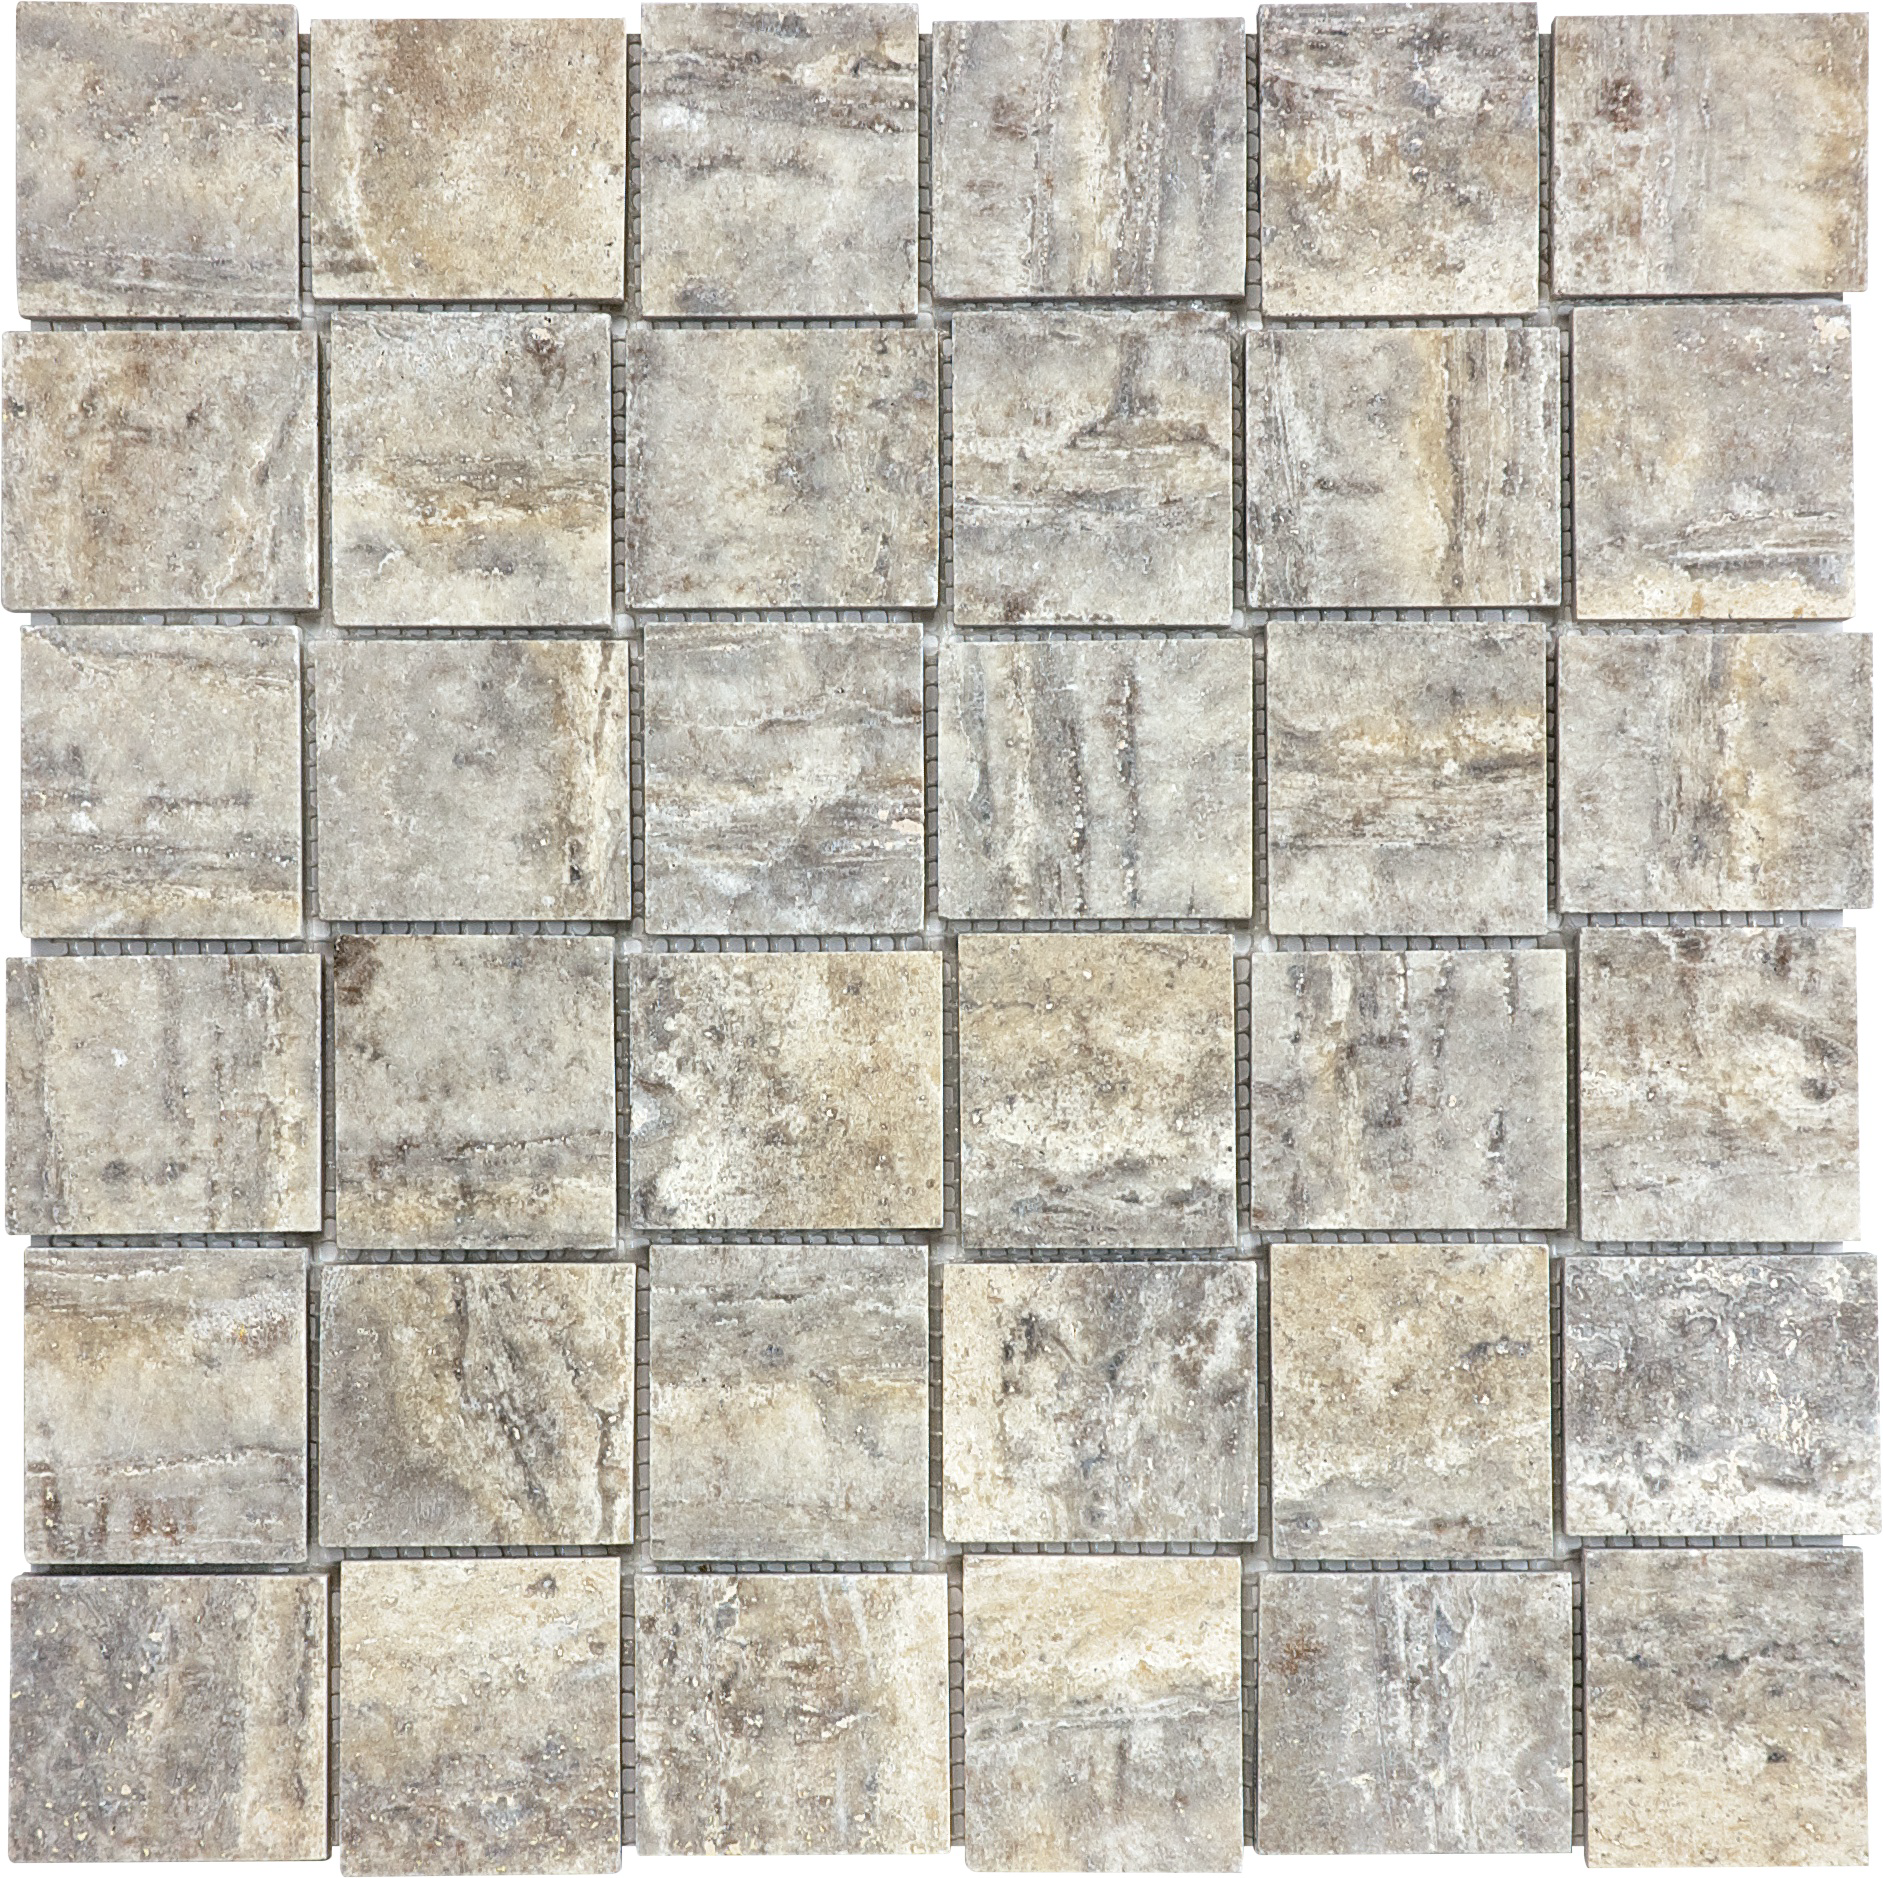 travertine veincut basketweave 2x2-inch pattern natural stone mosaic from silver ash anatolia collection distributed by surface group international honed finish straight edge edge mesh shape